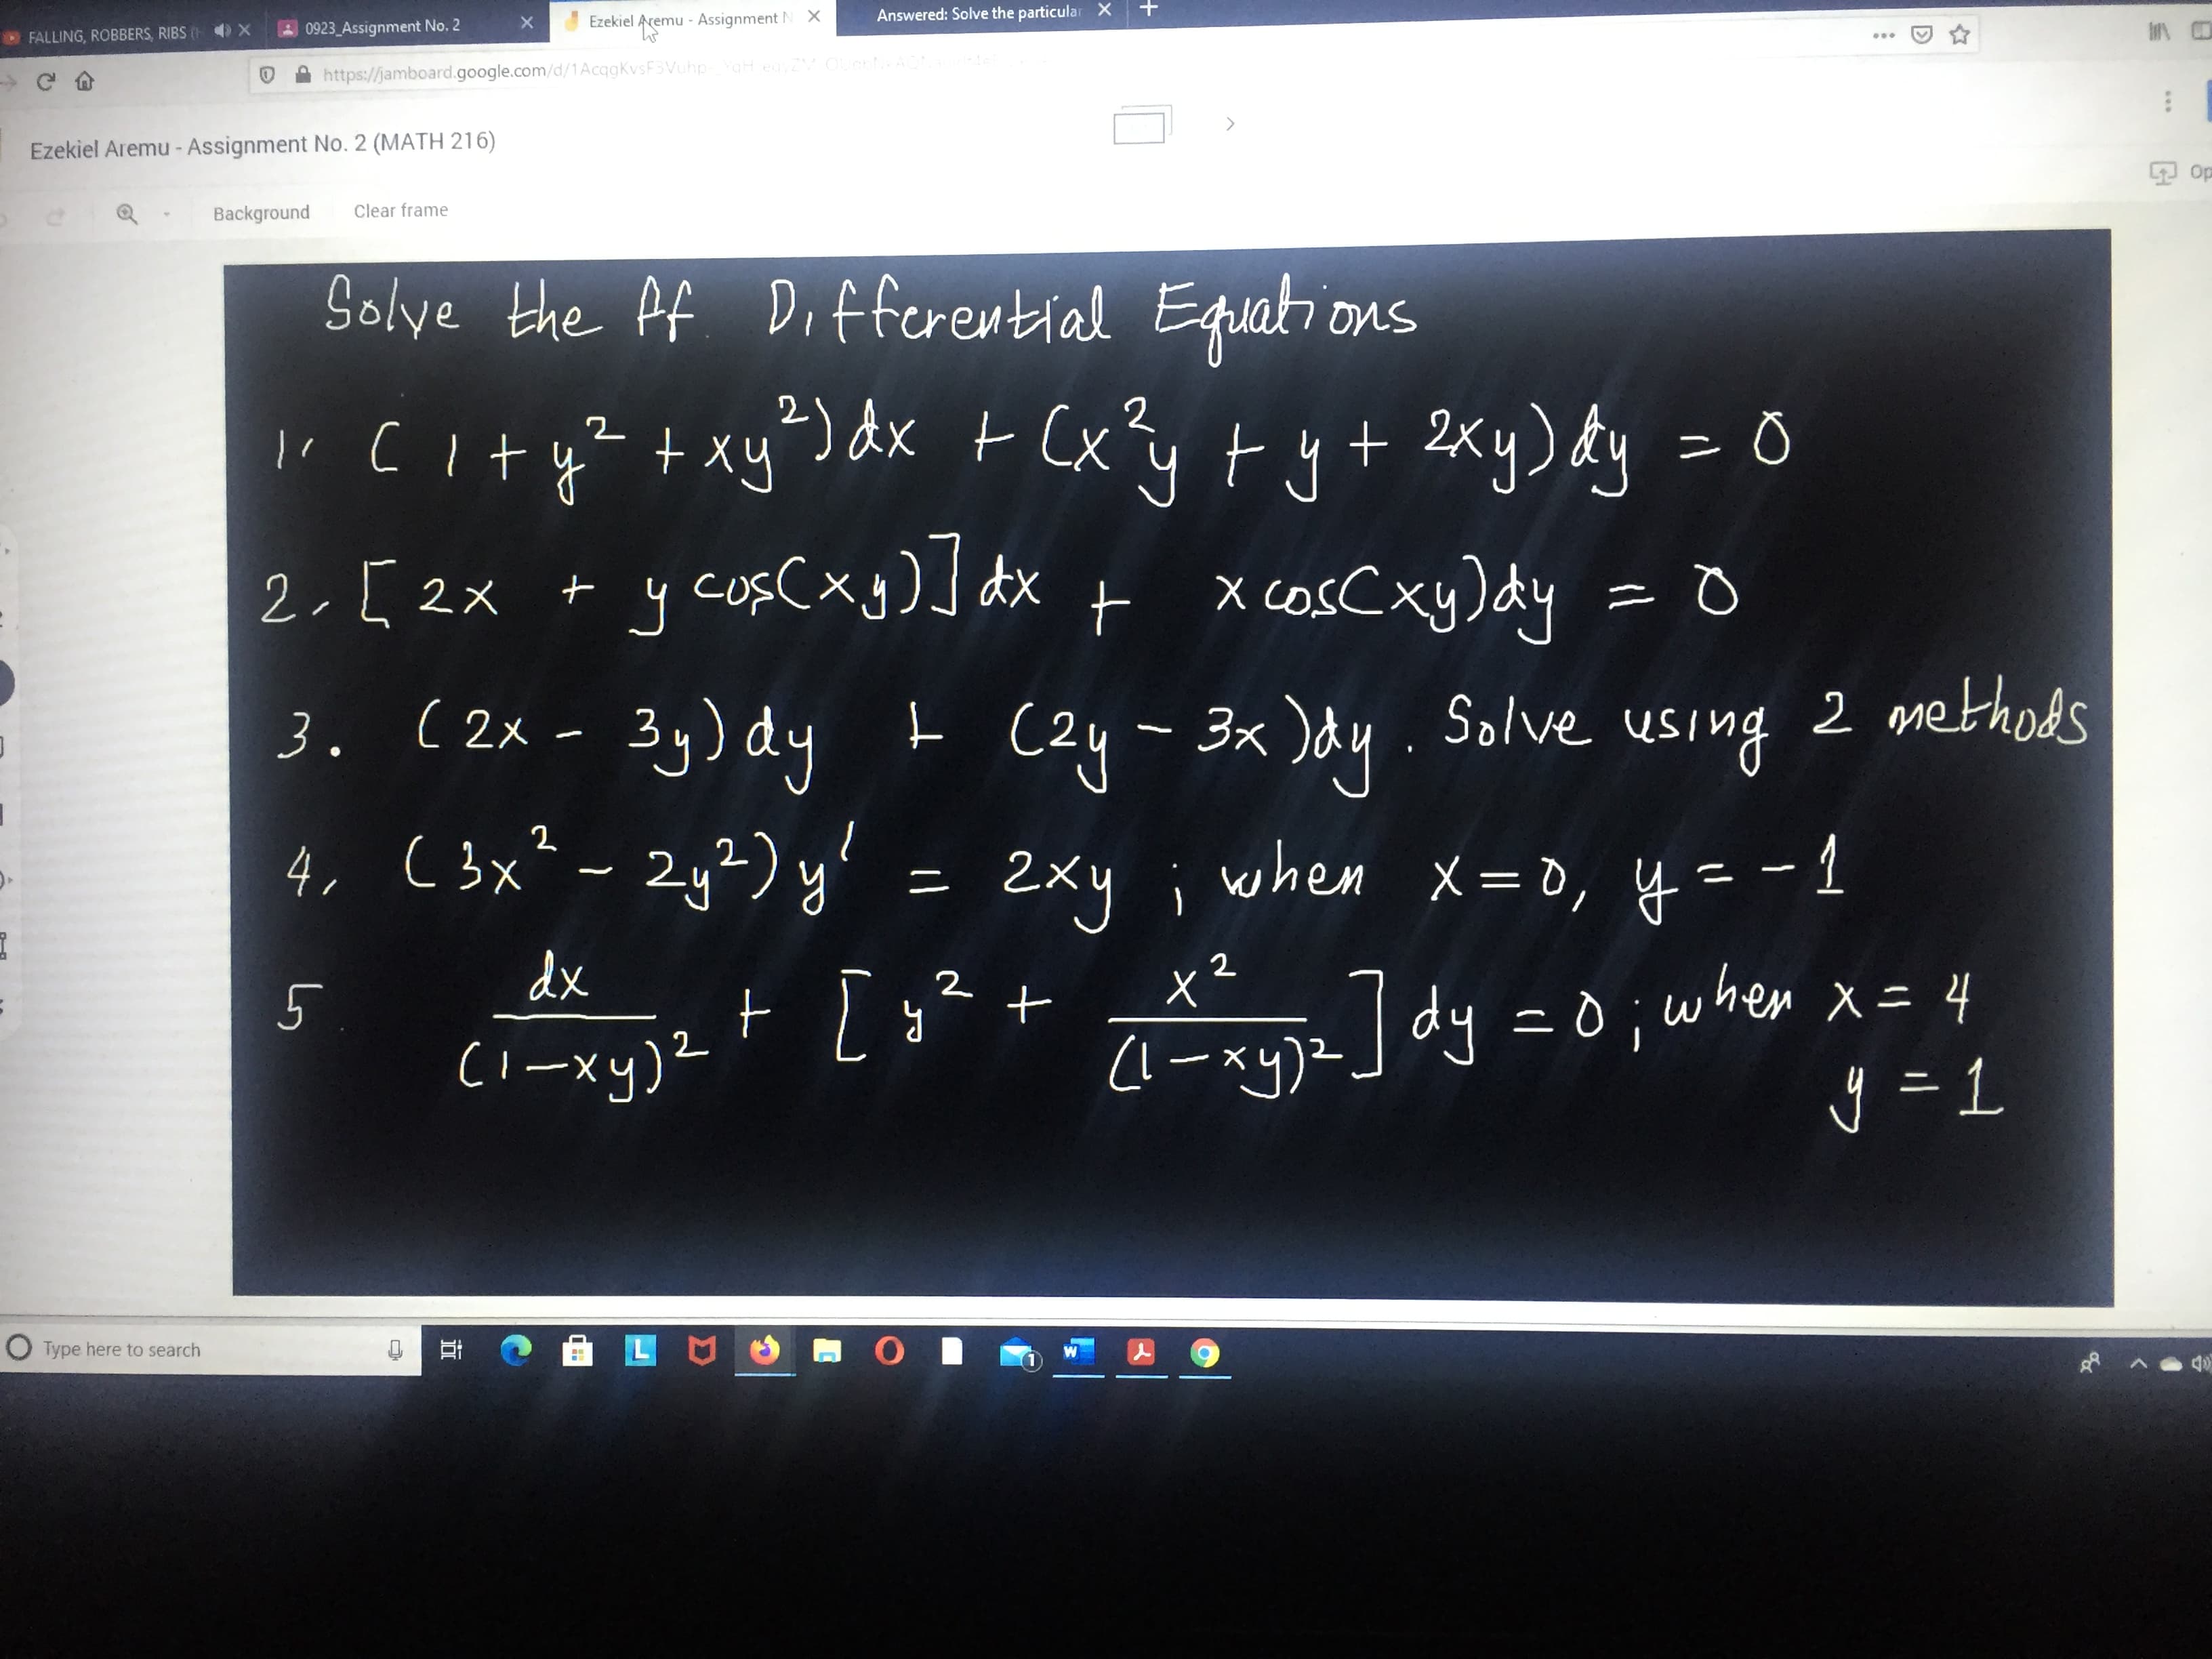 Solve the Af Differential Equations
I' city? +xy") dx t Cxy ty+ 2xy) &y
ニ0
2.[ 2x + y copCxg] dx
+ y cosCxy)] dx
x coscxy)dy
3. (2x - 3y) dy
(2y- 3x )dy
Solve using
2 methods
4, (3x²-2y²) y'
2xy ; when x= d, y = - 1
+ [ x*+ ] dy =0; when x= 4
y =1
dx
2
+ [ q? +
(1-xy)?
